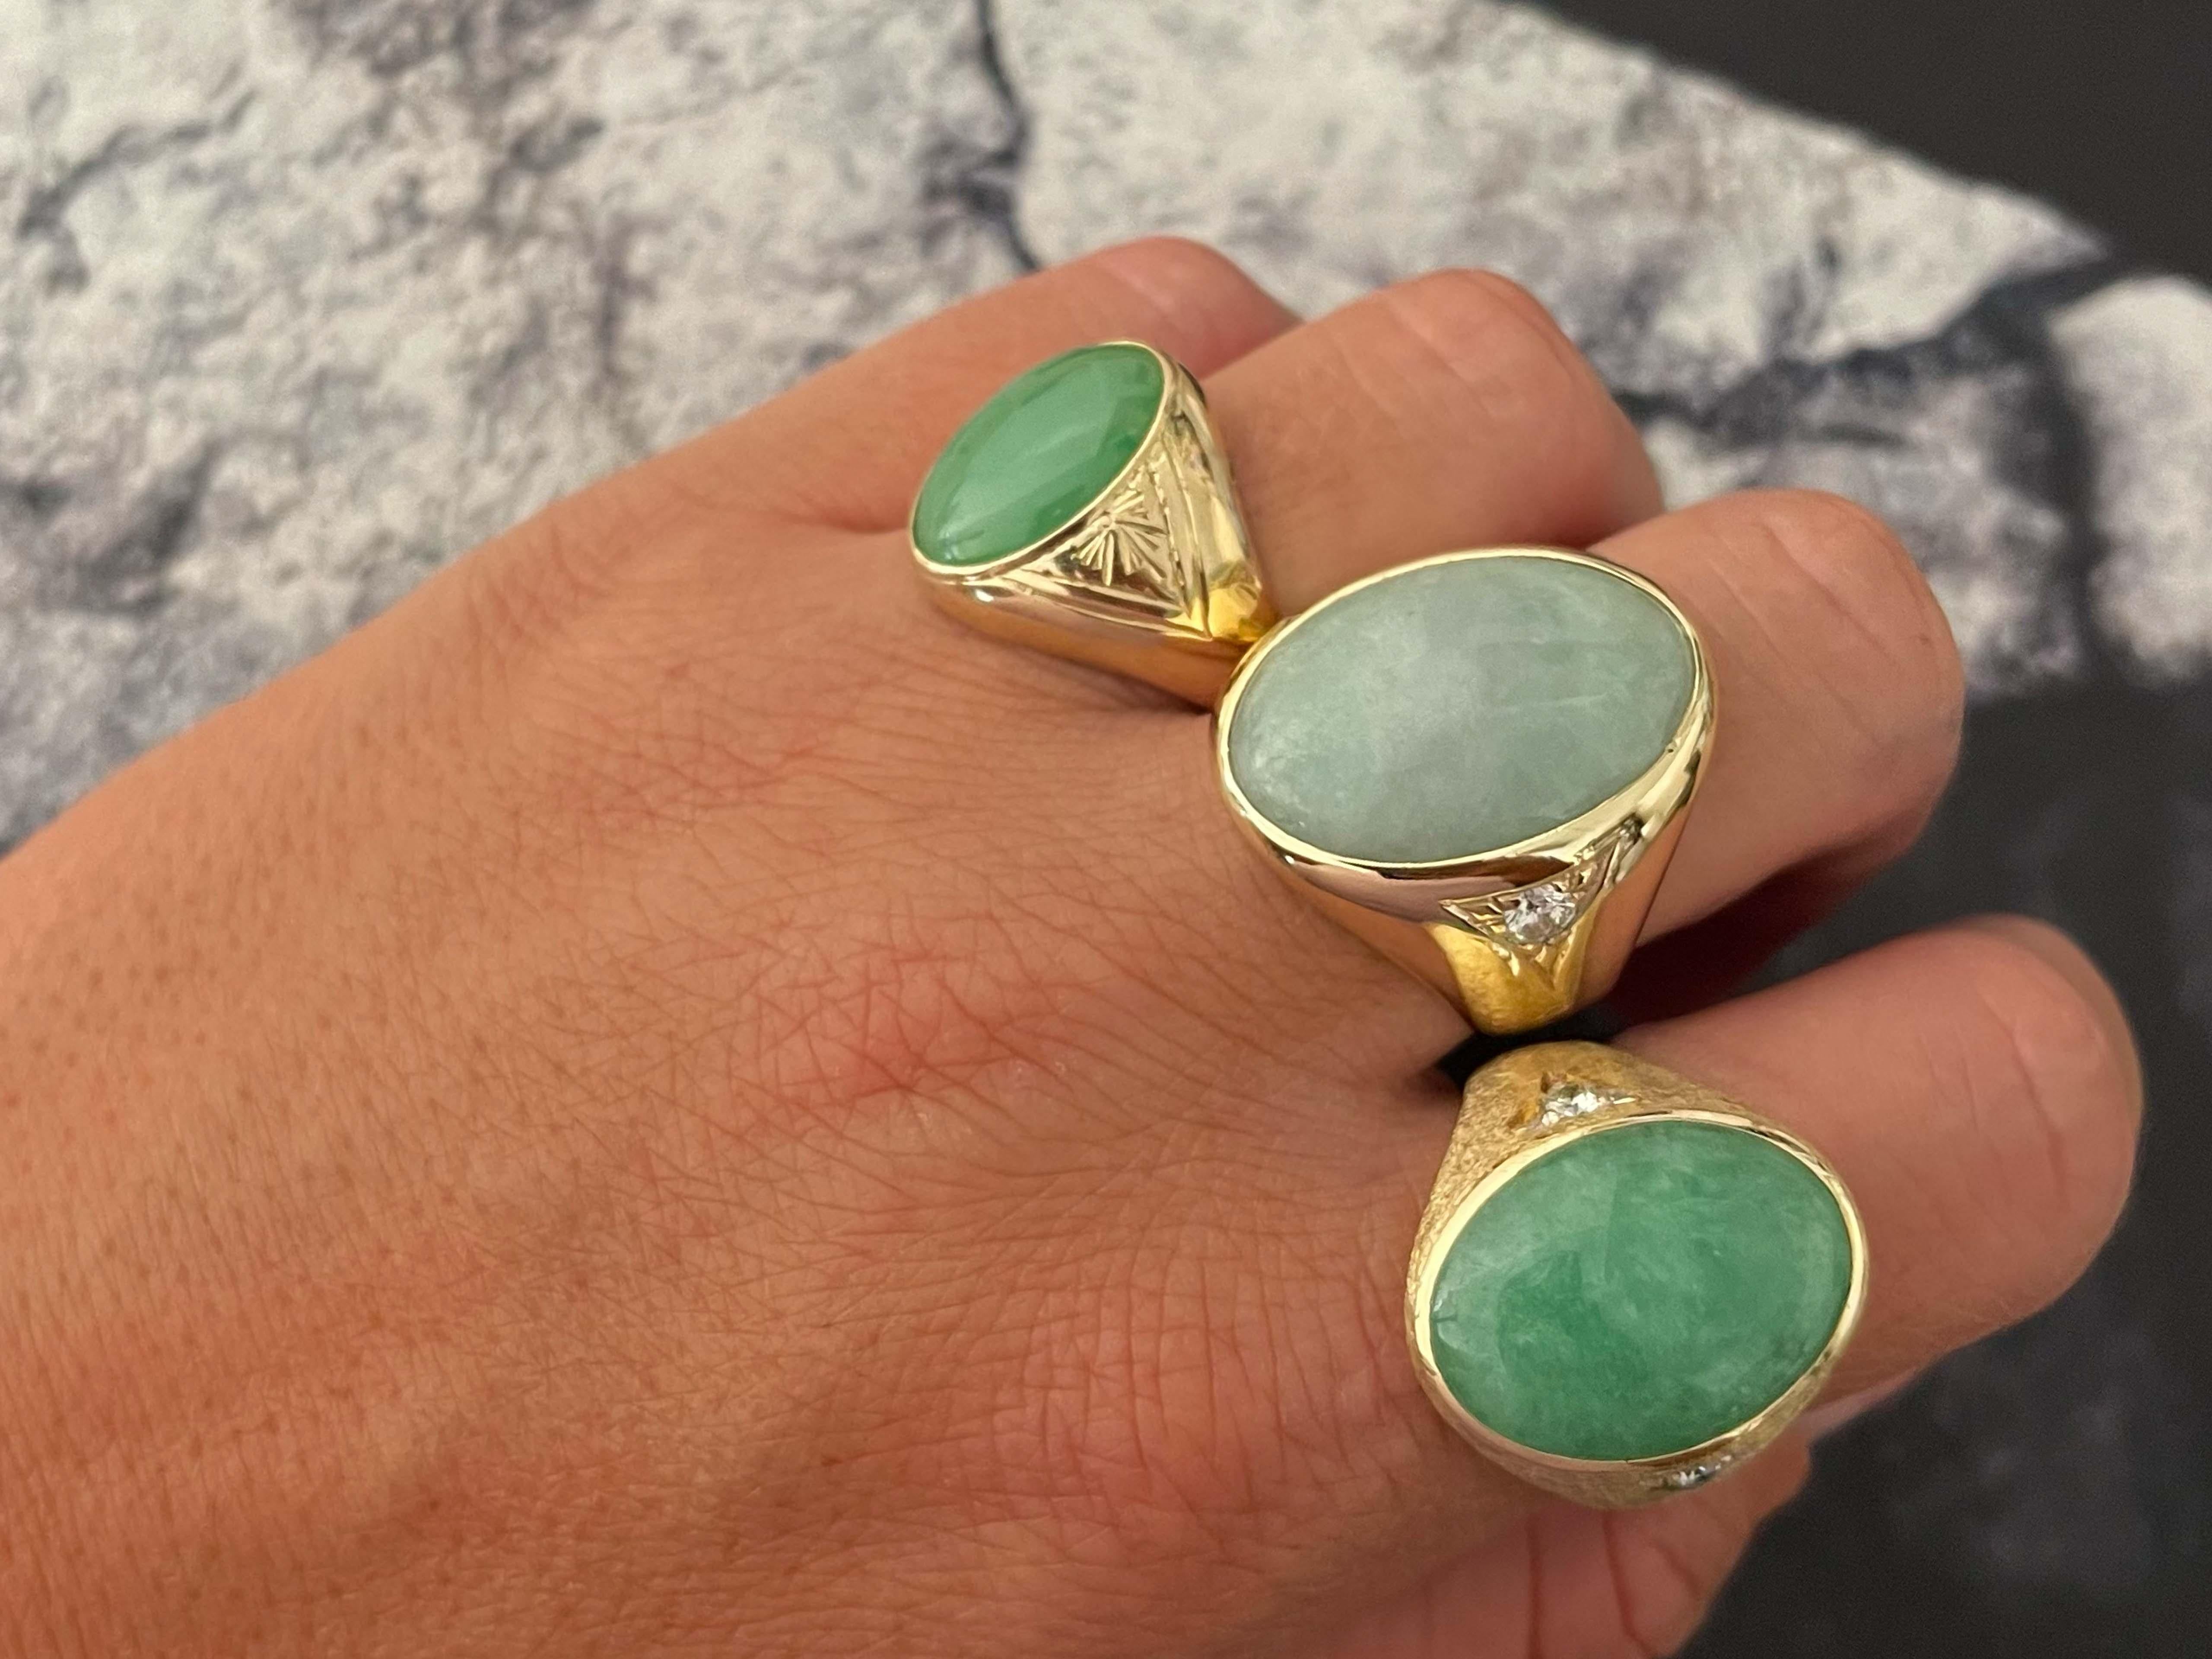 Item Specifications:

Metal: 14k Yellow Gold 

Style: Statement Ring

Ring Size: 9 (resizing available for a fee)

Total Weight: 10.6 Grams

Gemstone Specifications:

Center Gemstone: Jadeite Jade

Shape: Oval

Color: Green

Cut: Cabochon

Jade